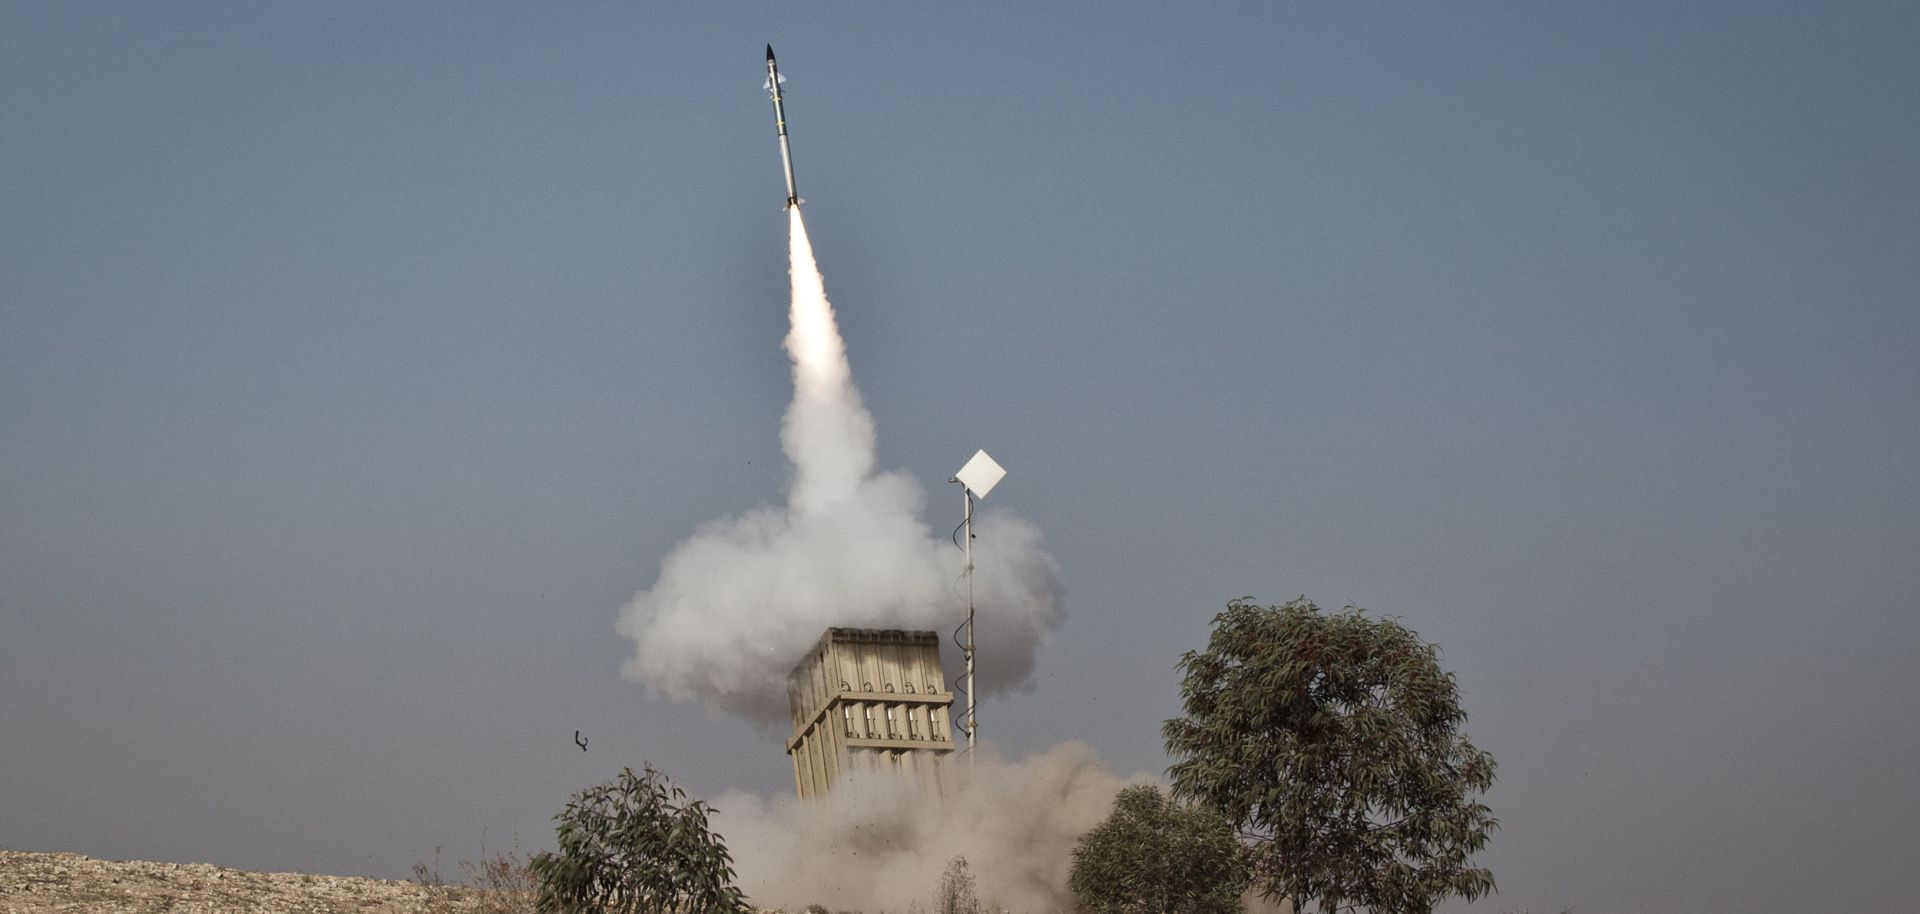 An Israeli soldier lies on the ground as missiles are fired from an Iron Dome anti-missile station on November 15, 2012 near the city of Beer Sheva, Israel. 